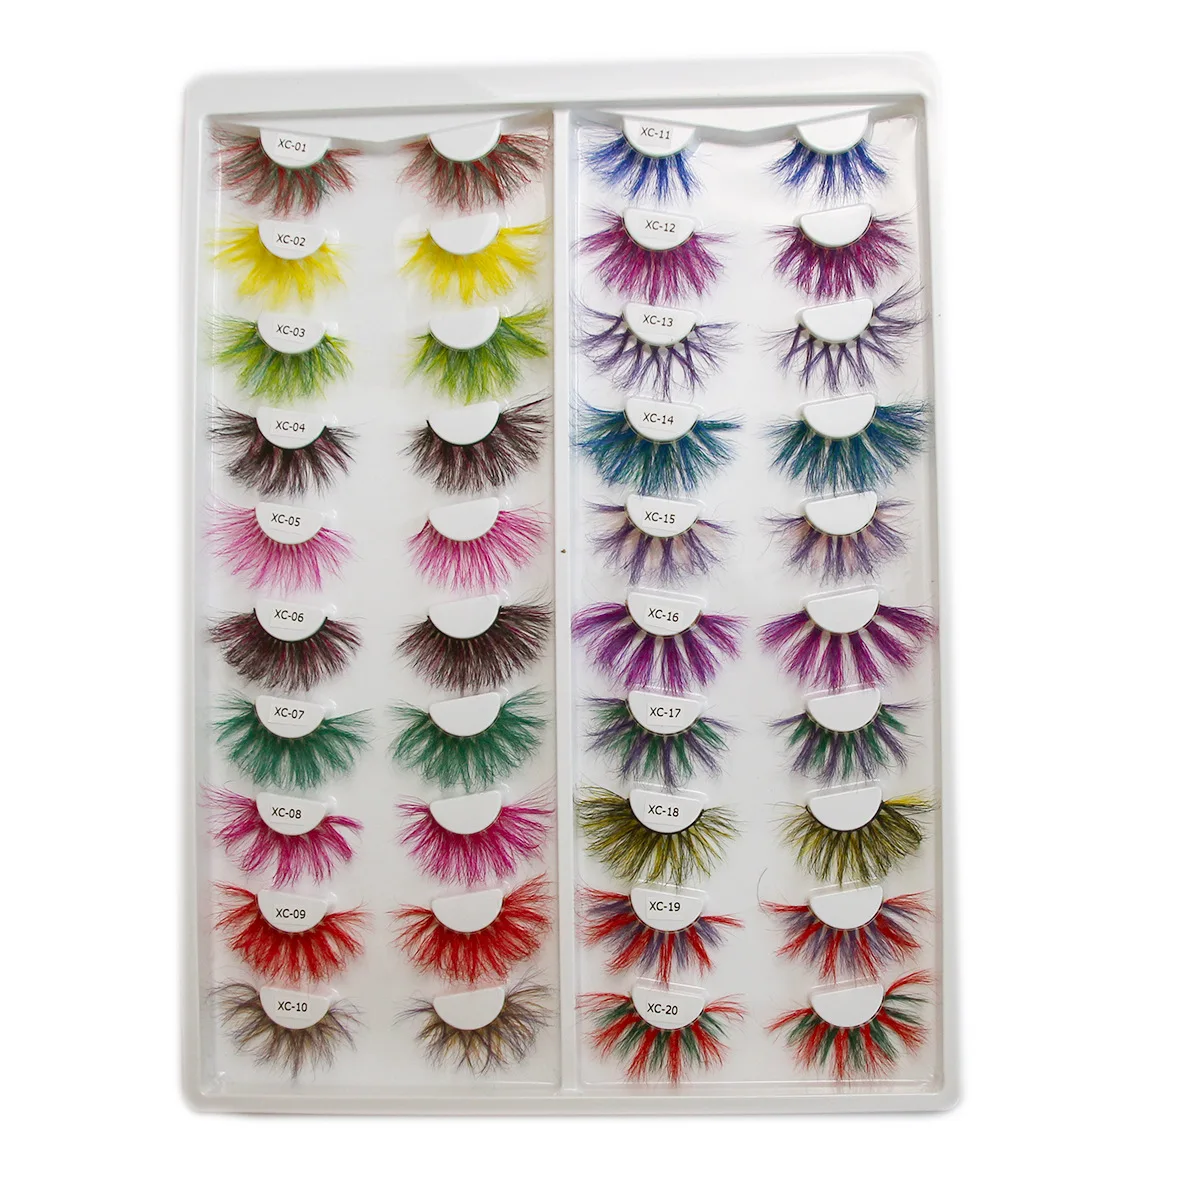 

Wholesale Eshinee 8D Mink Lashes Vendors 25 mm Mink Lashes 25mm Colored Eyelashes With Custom Packaging Your Own Logo